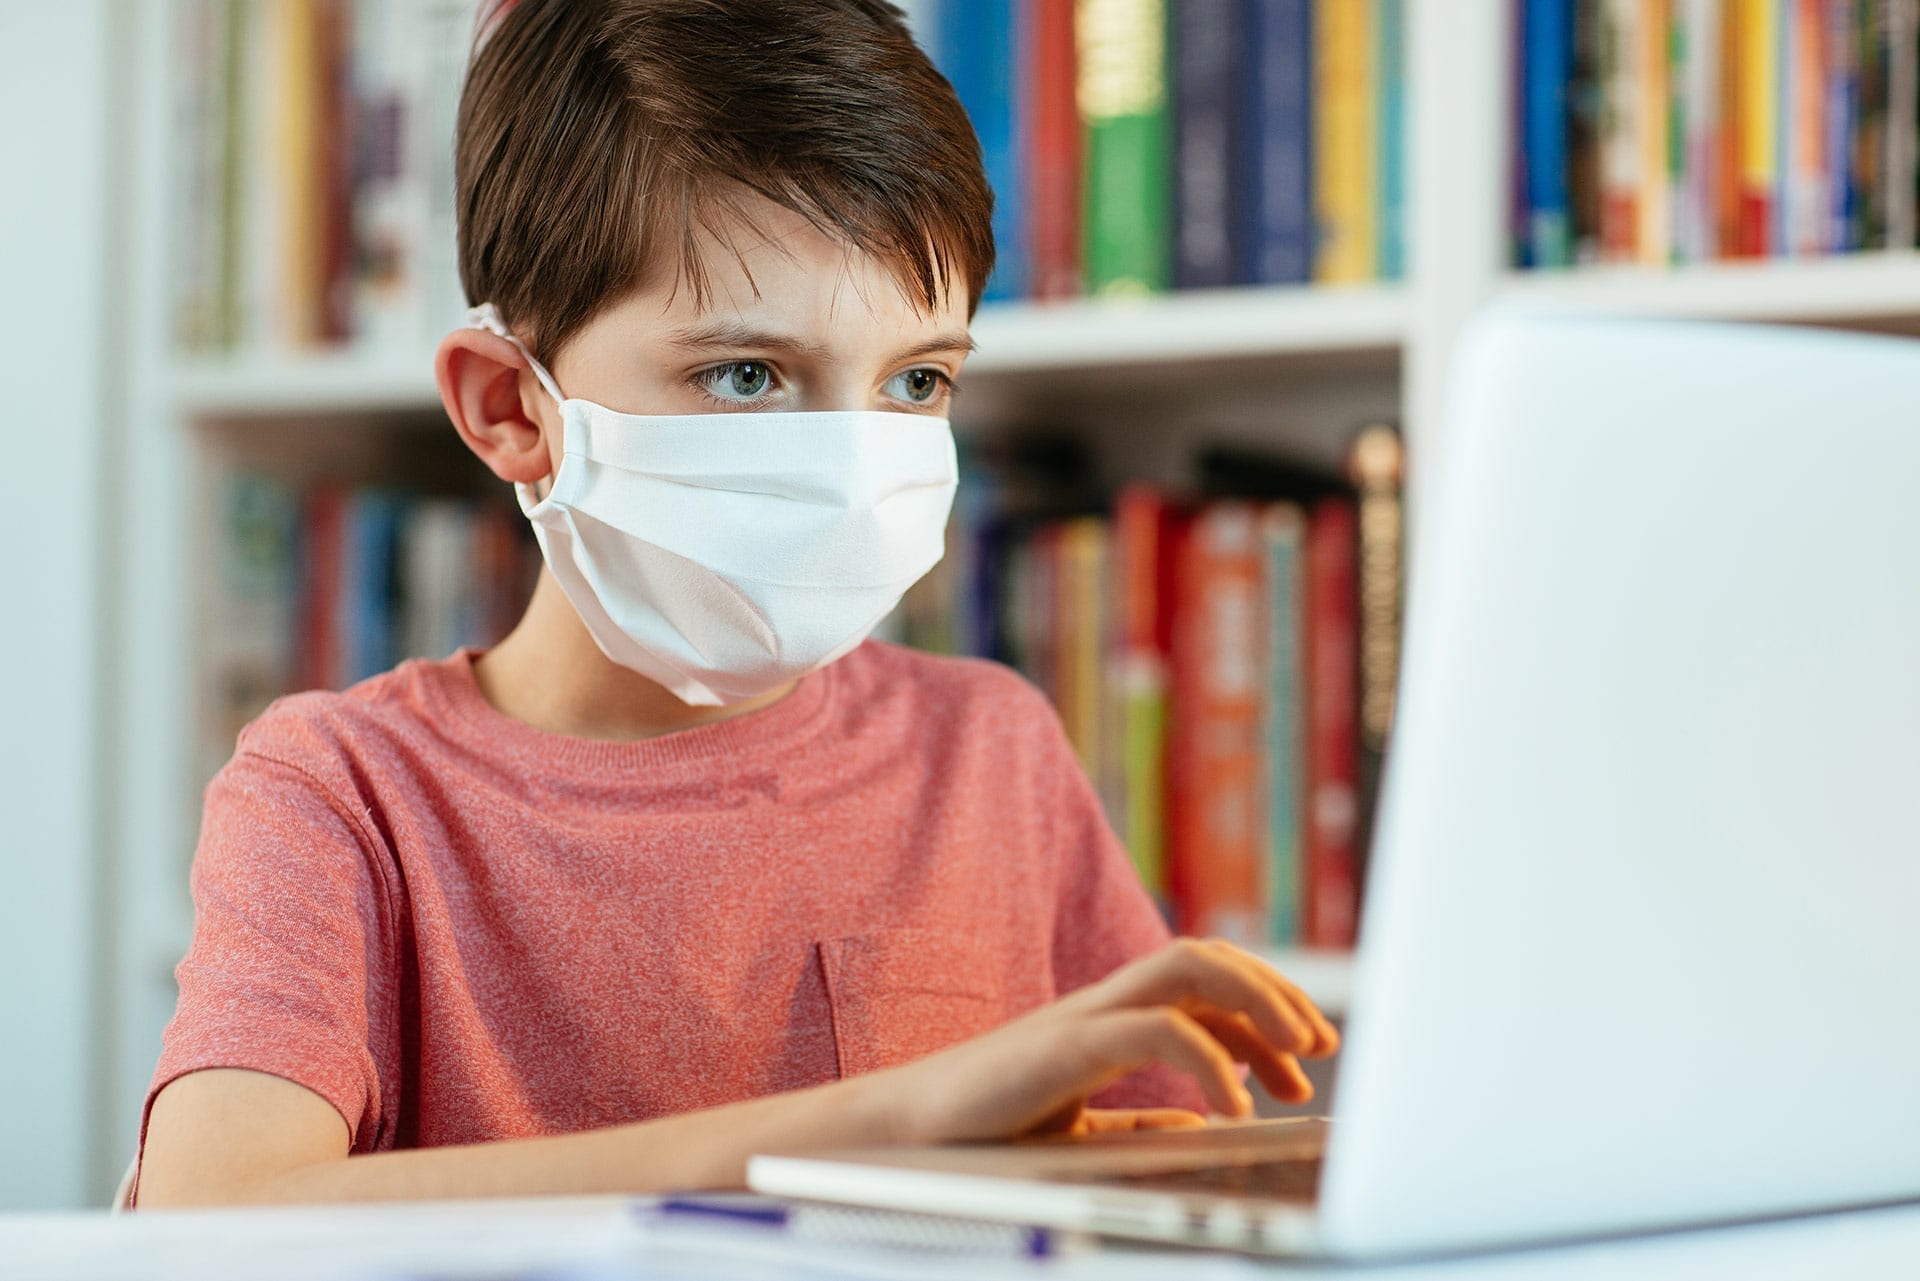 Boy wears a face respiratory face mask while working on schoolwork on his laptop